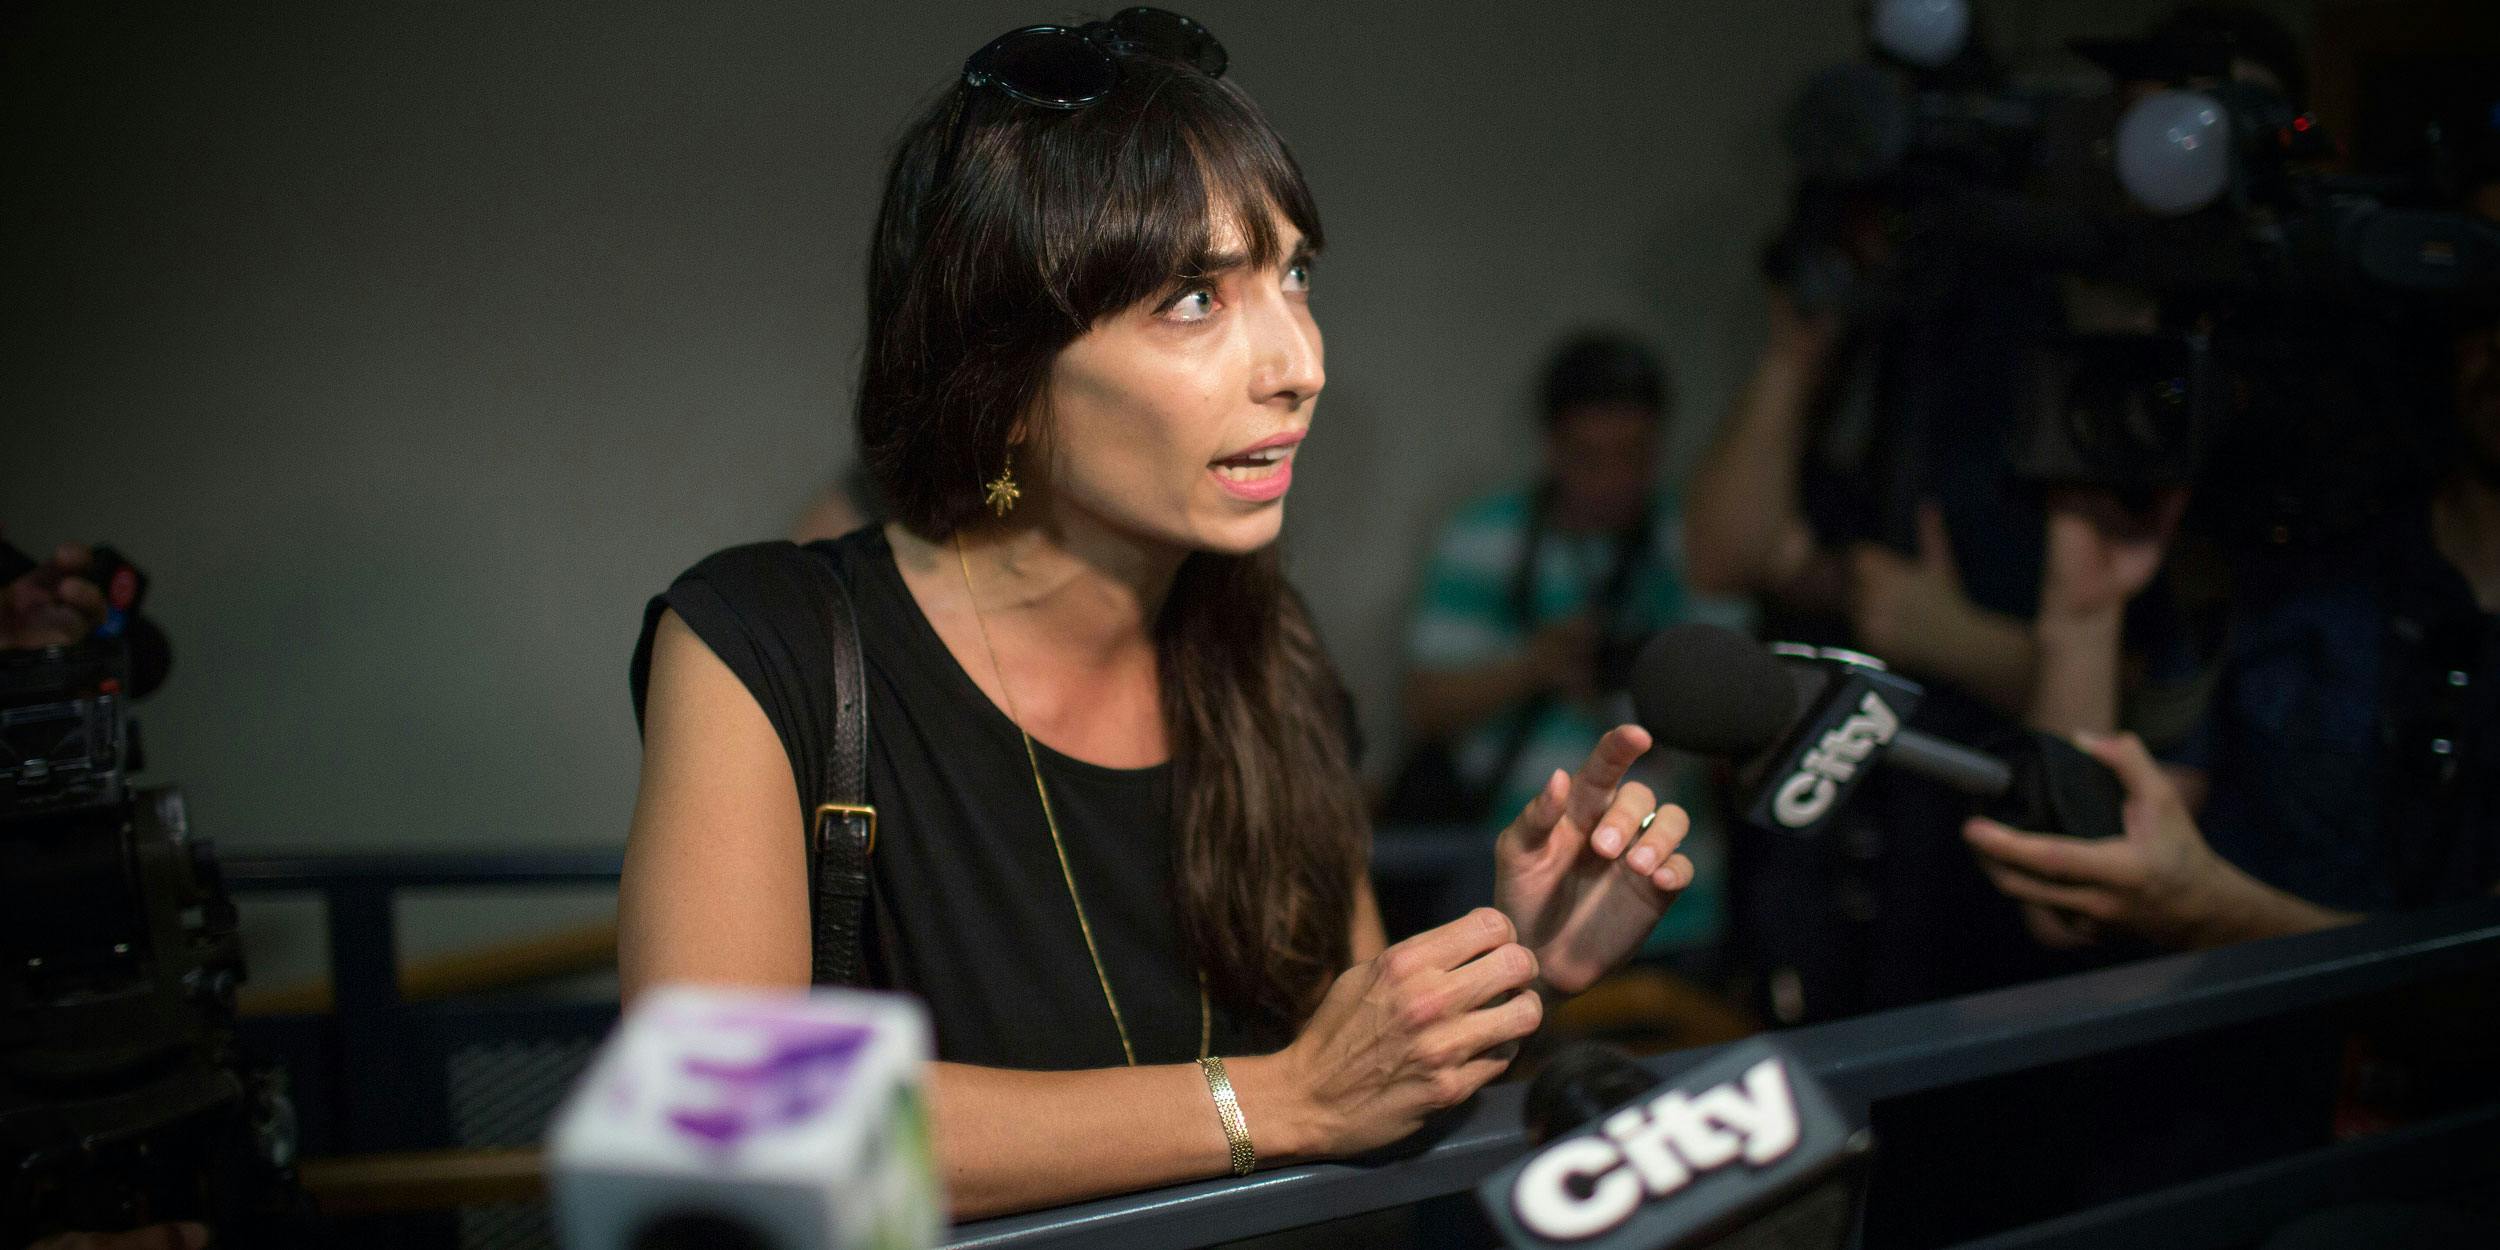 Jodie Emery speaks about how she has a problem with Canada's legal cannabis act